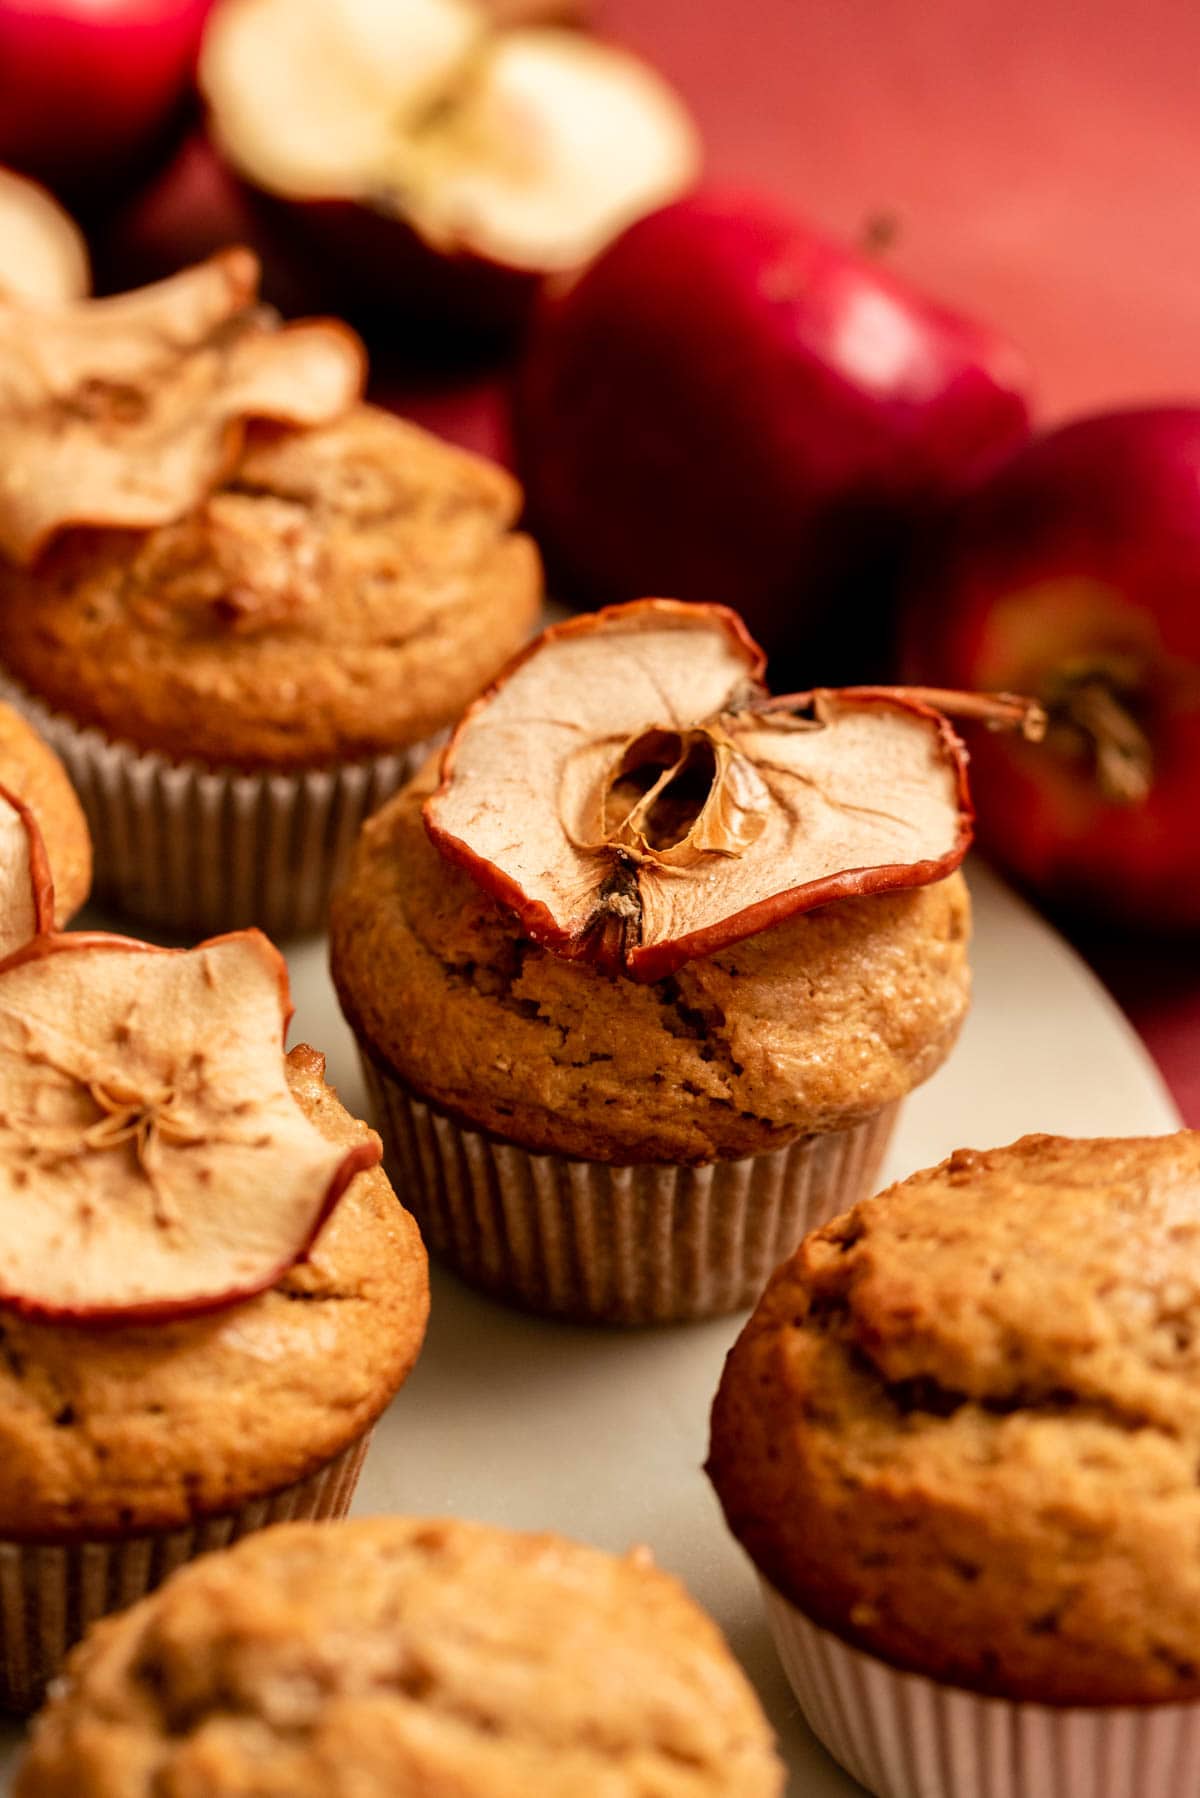 Apple butter muffin with a dried apple sitting on top of the muffin.